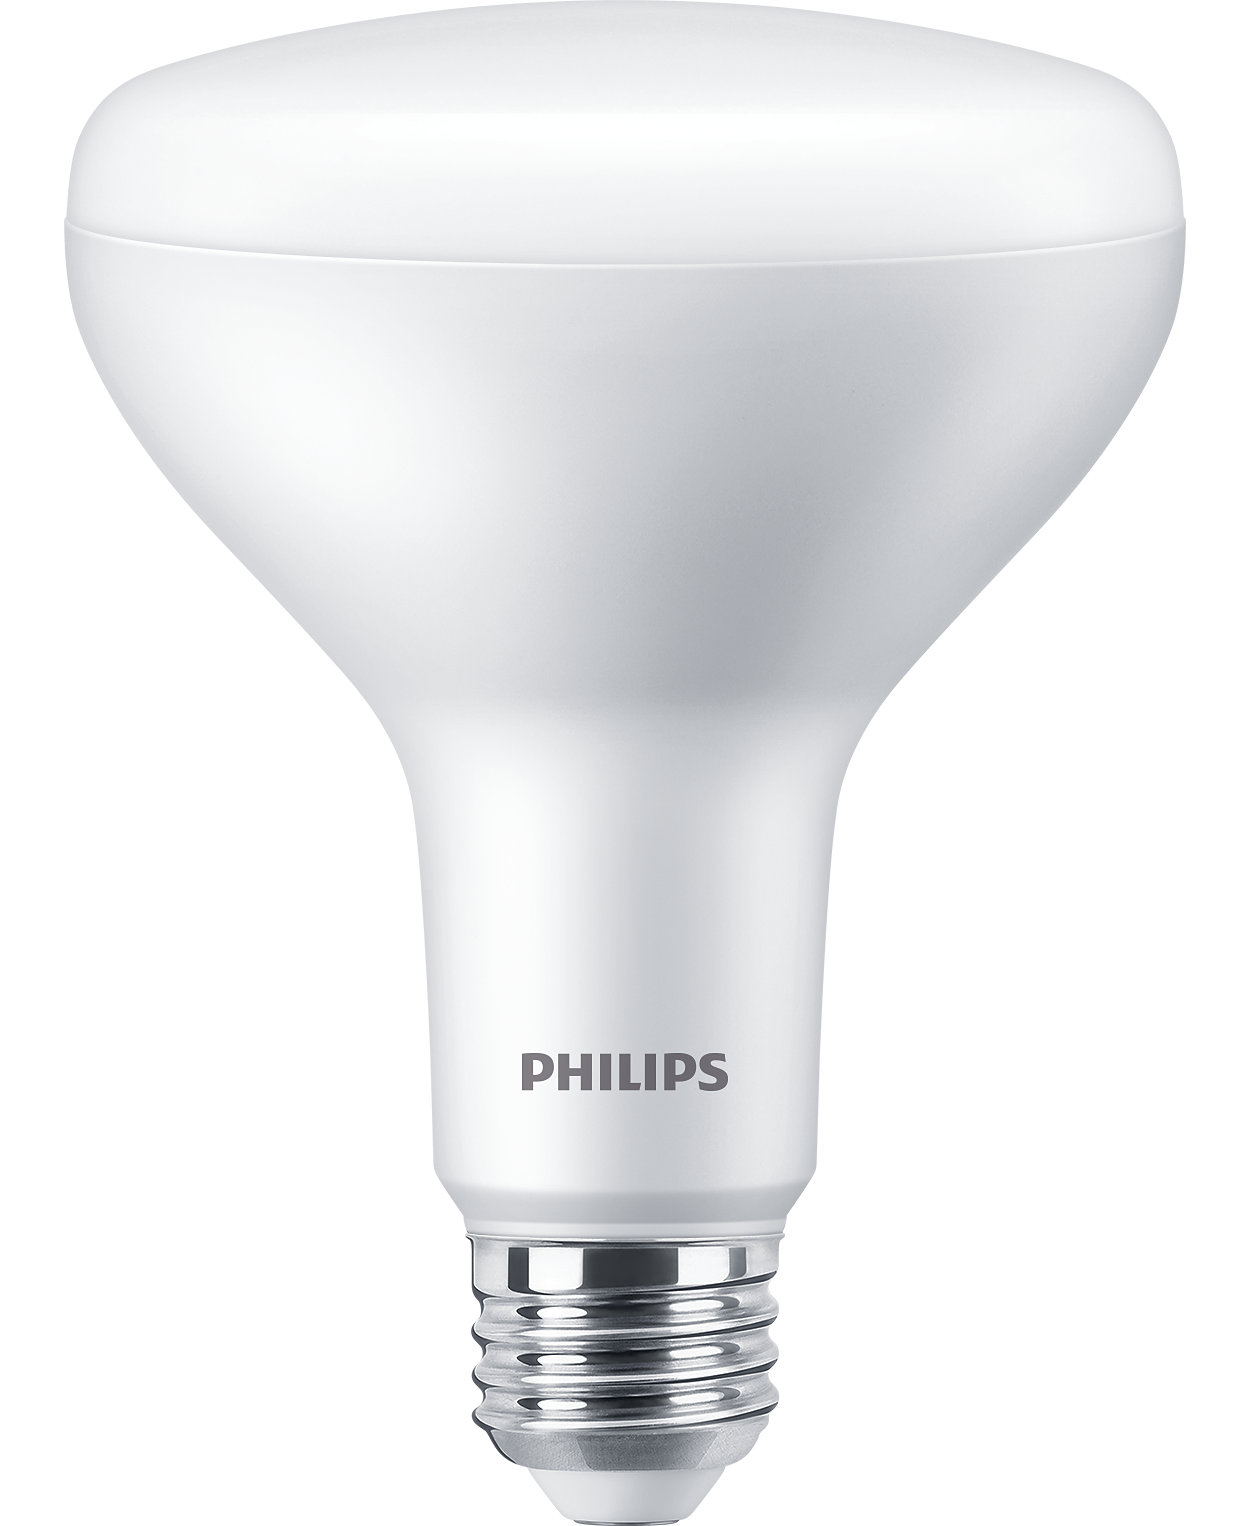 Attractive, dimmable, and afforadlble LED BR30 lamp solution